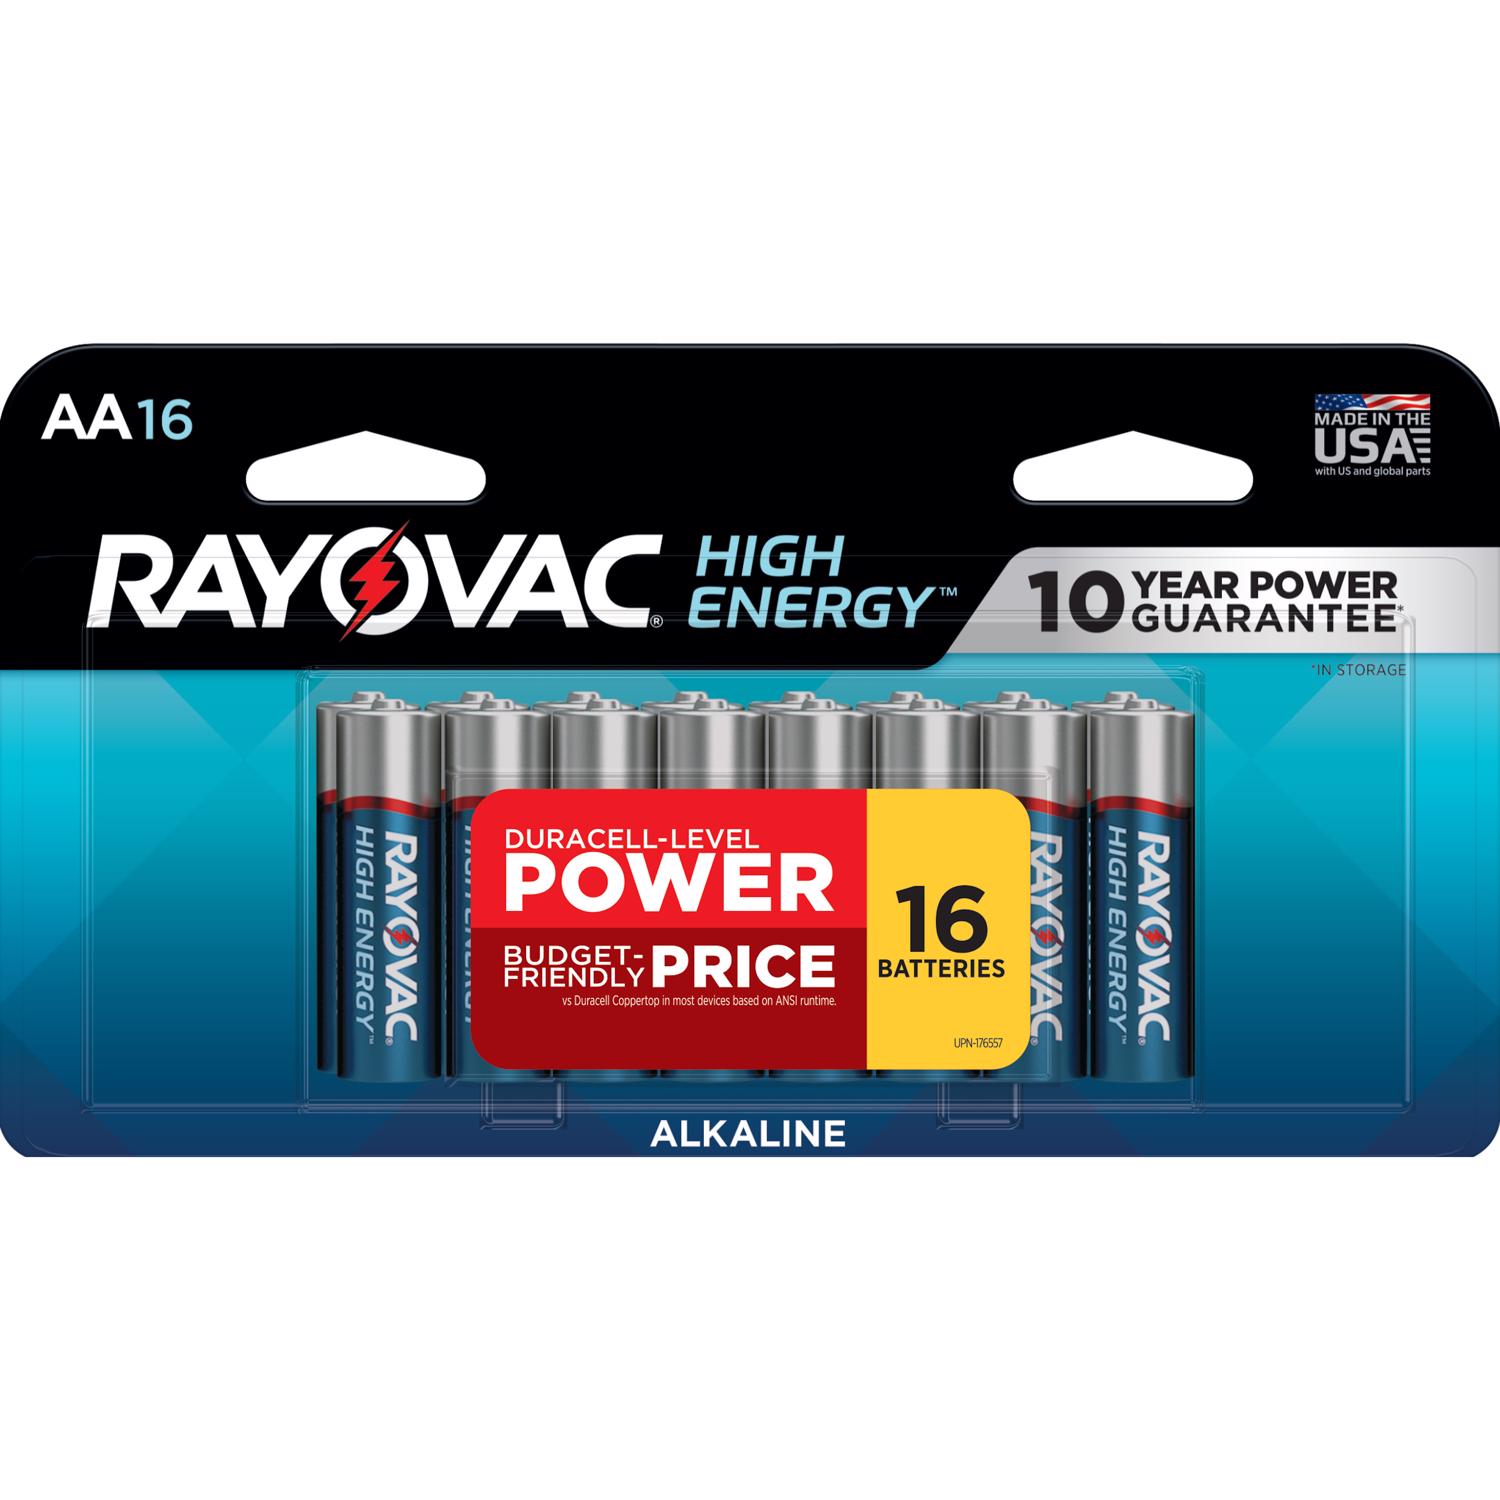 Photos - Household Switch Rayovac High Energy AA Alkaline Batteries 16 pk Carded 815-16LTK 